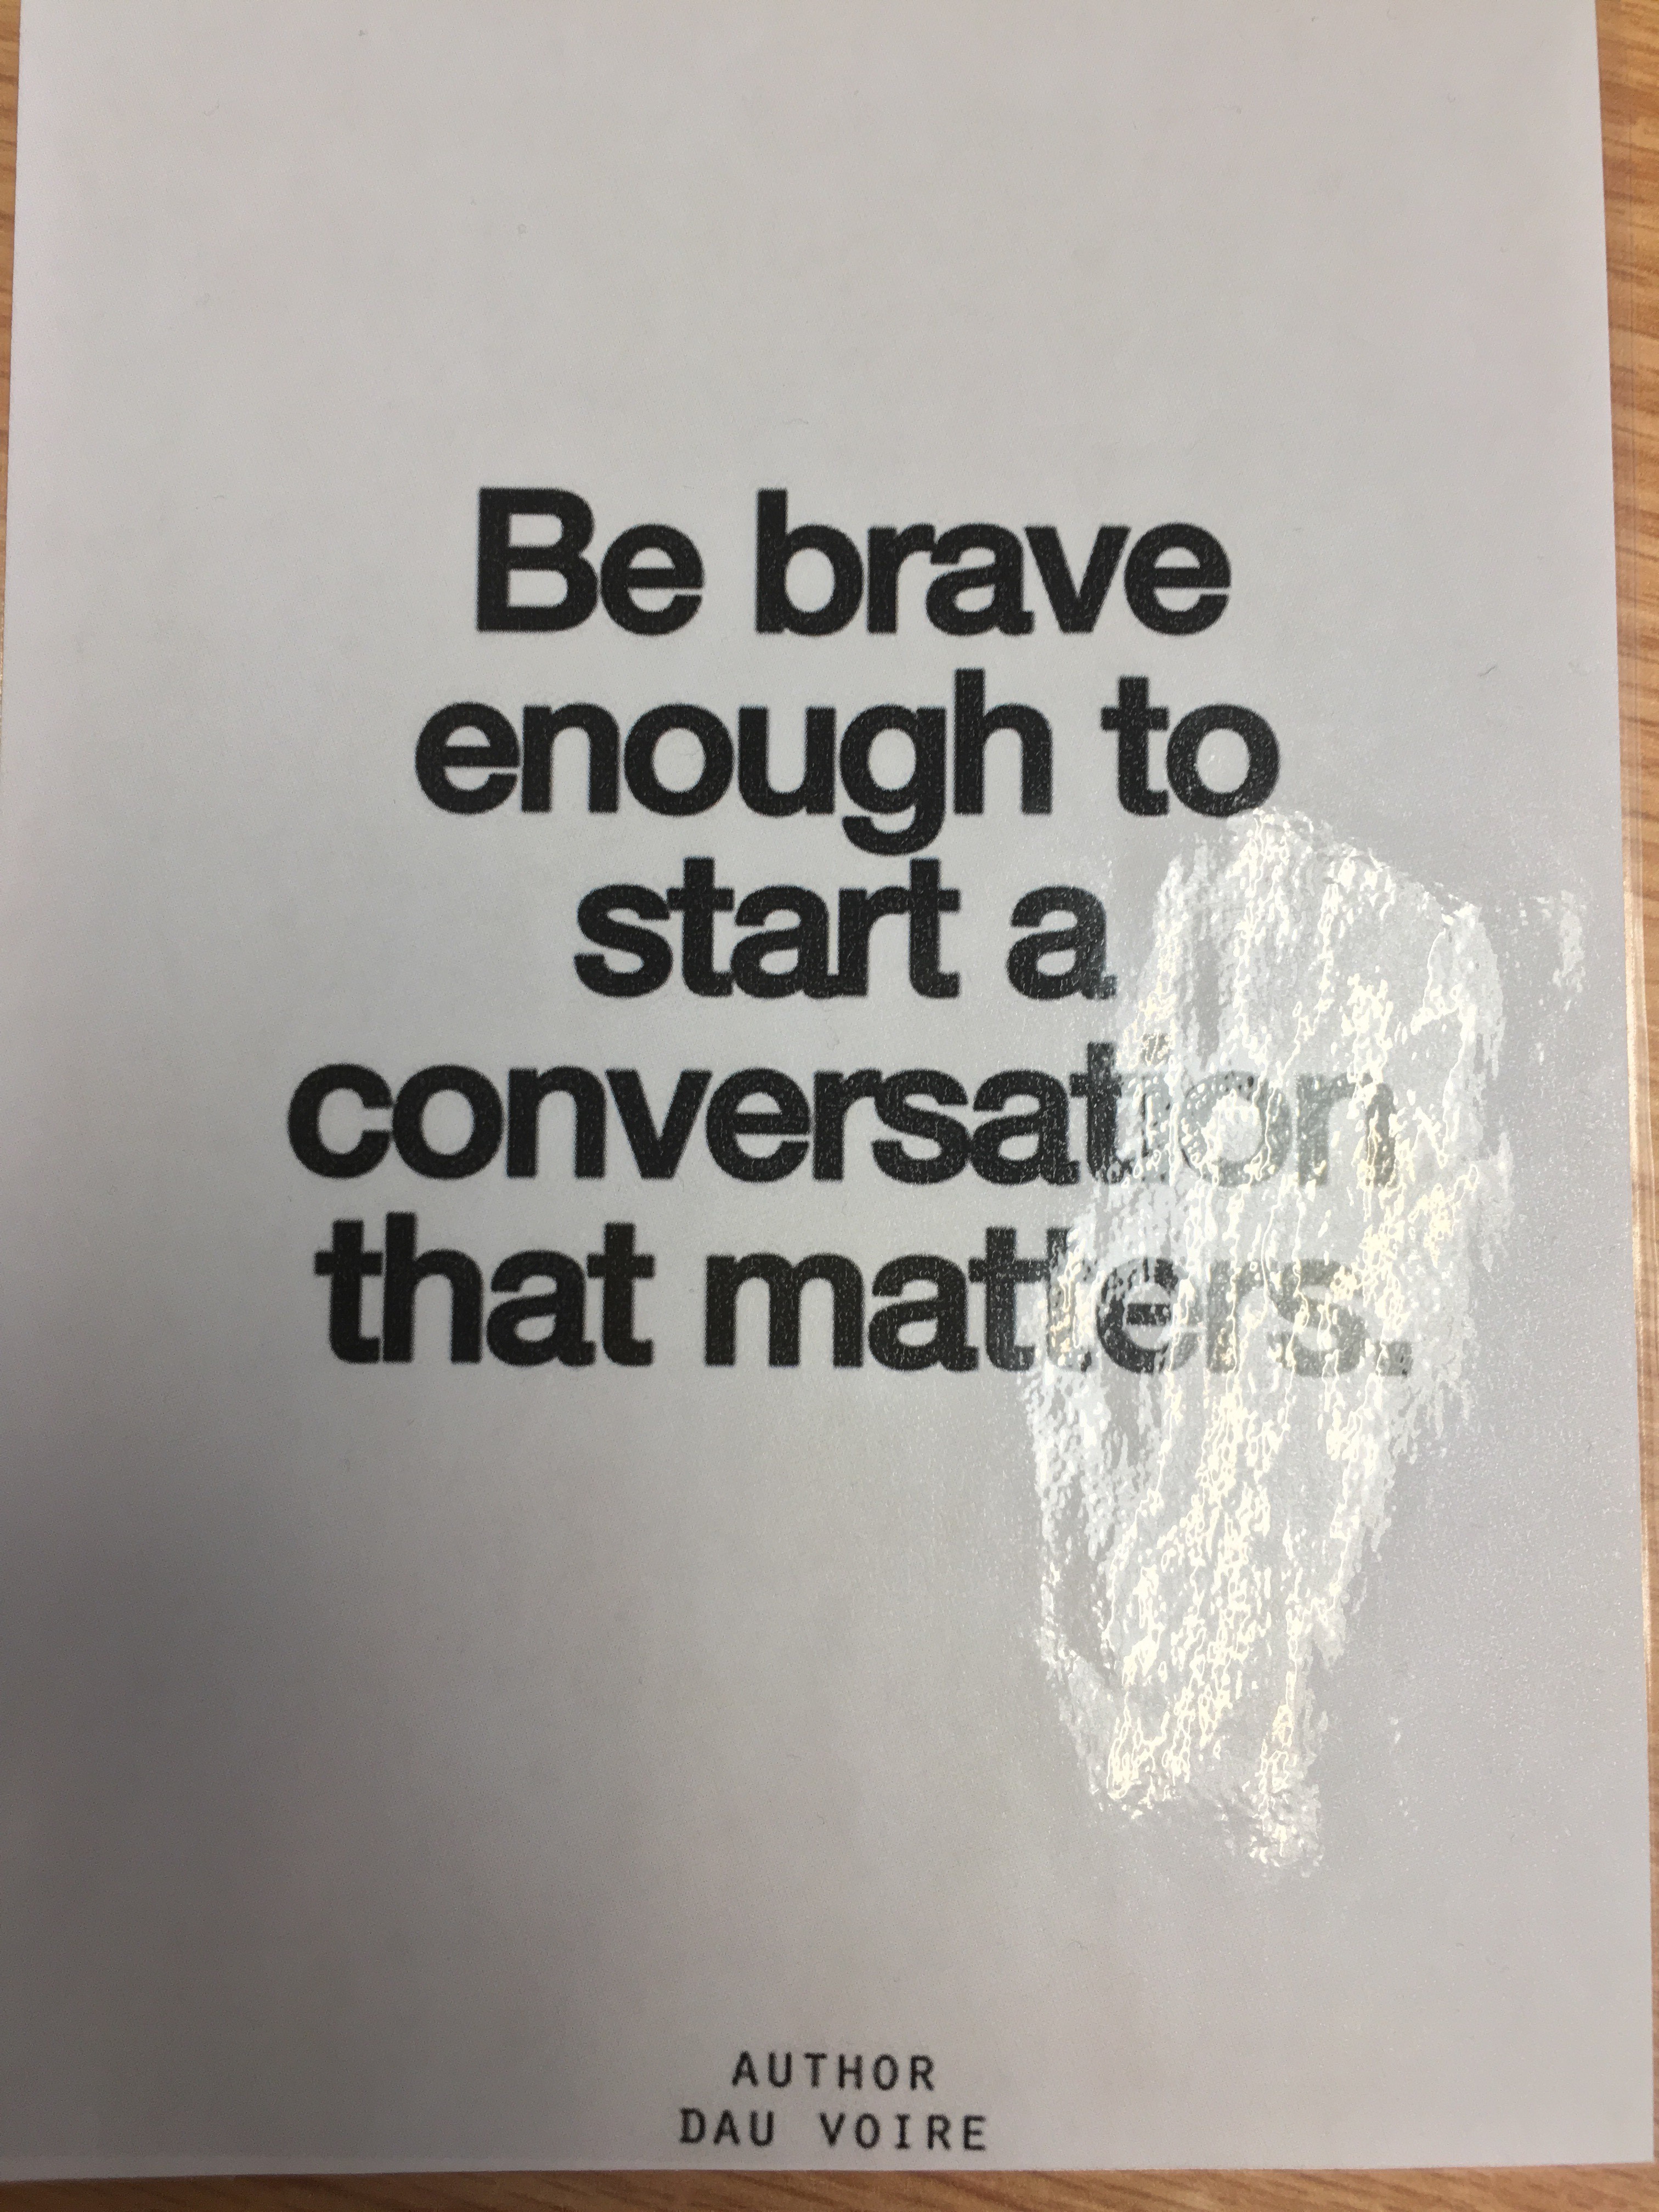 Text of quote: "Be Brave enouh to start conversations that matter."